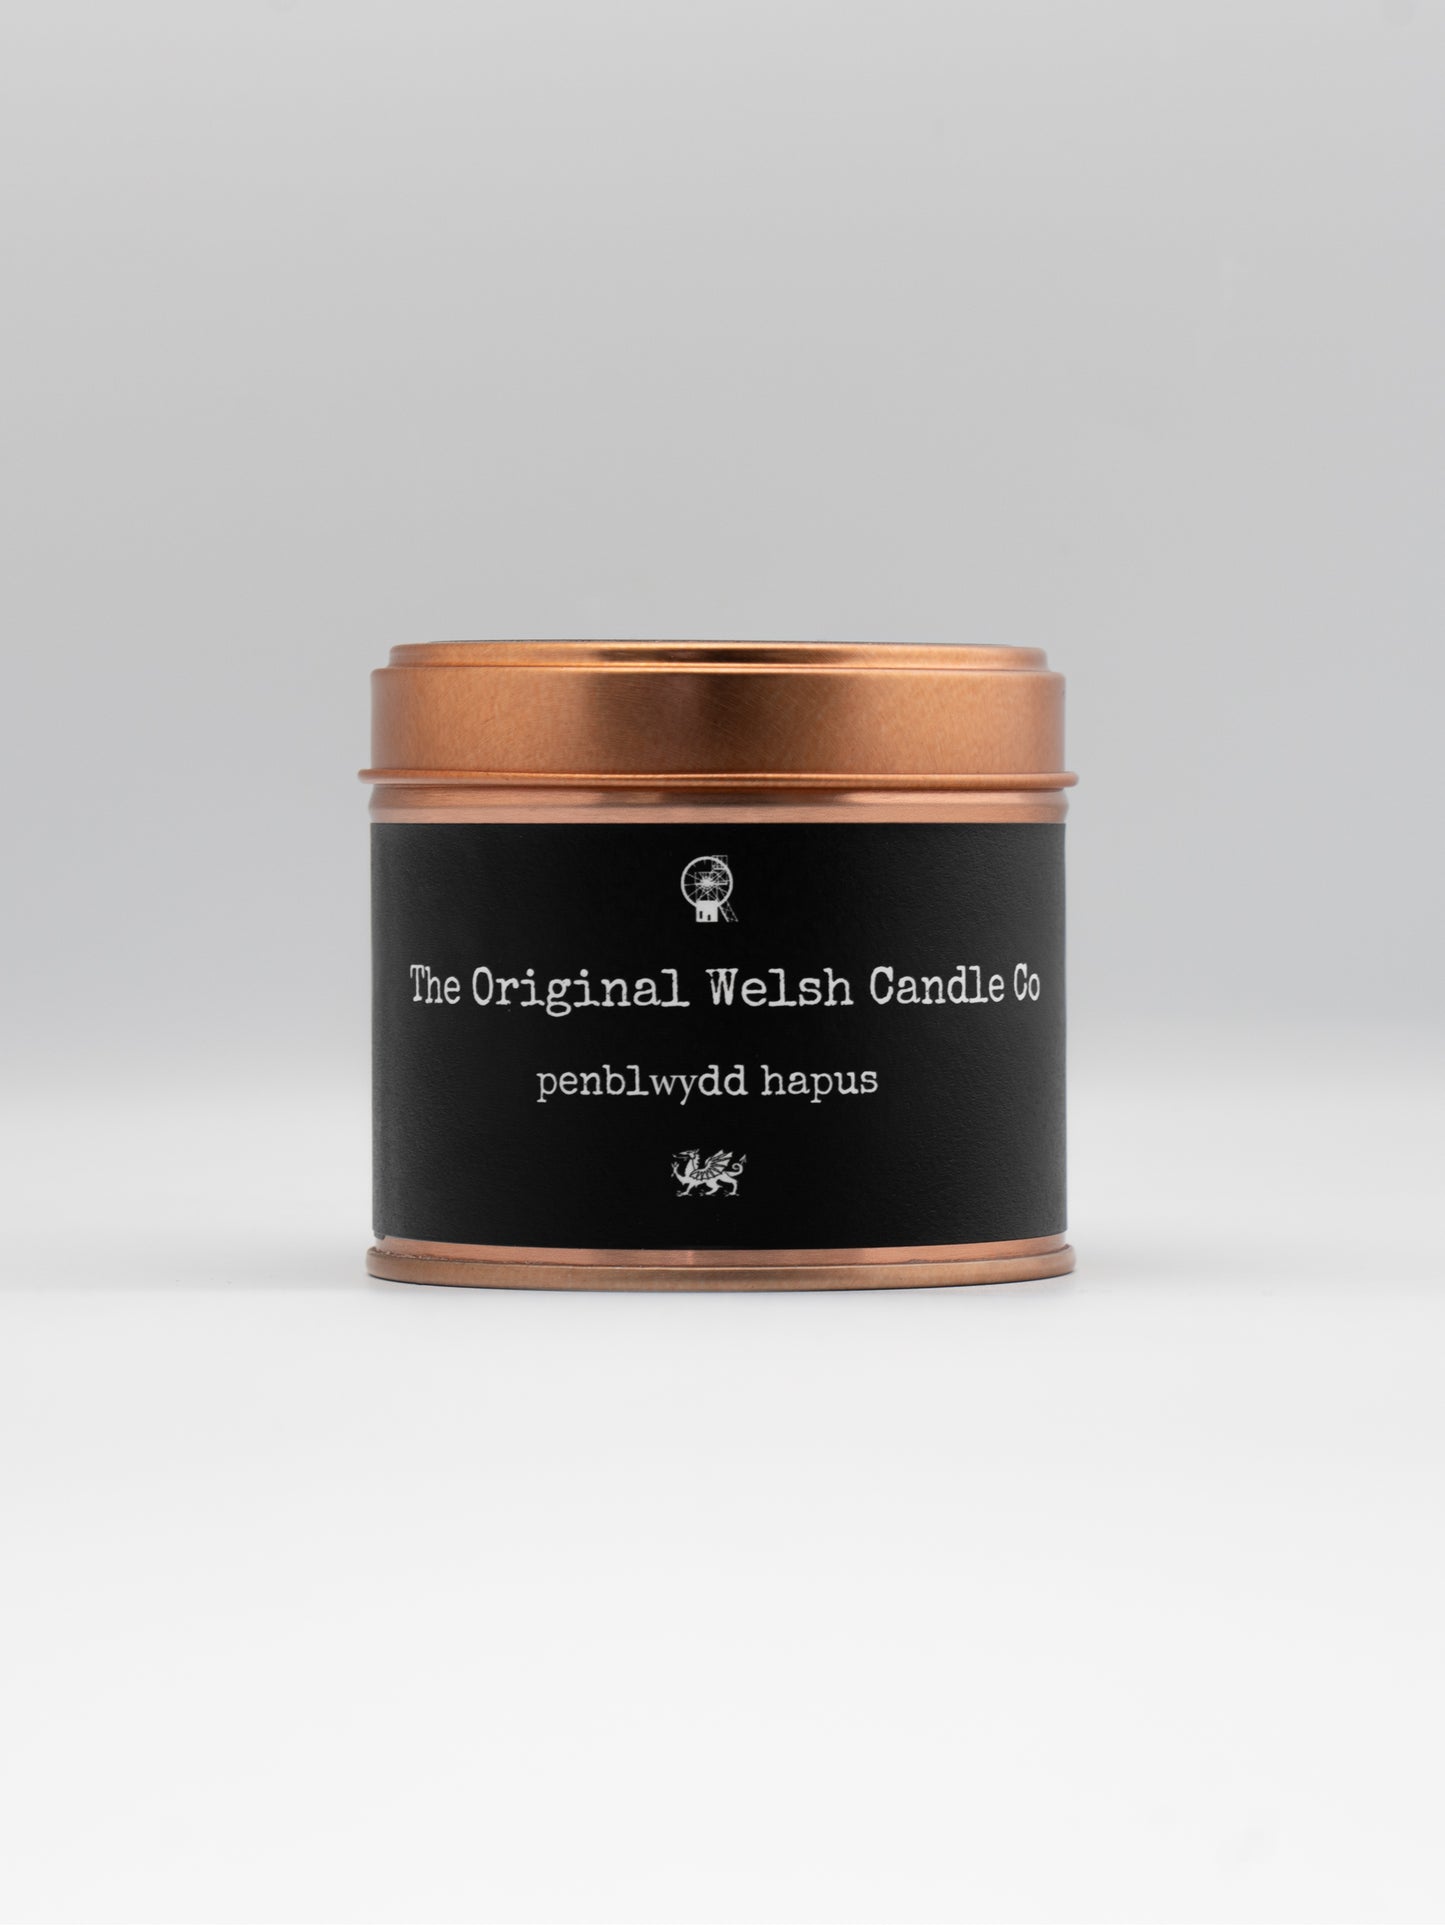 Penblwydd Hapus scented copper tin candle scented with fresh tea